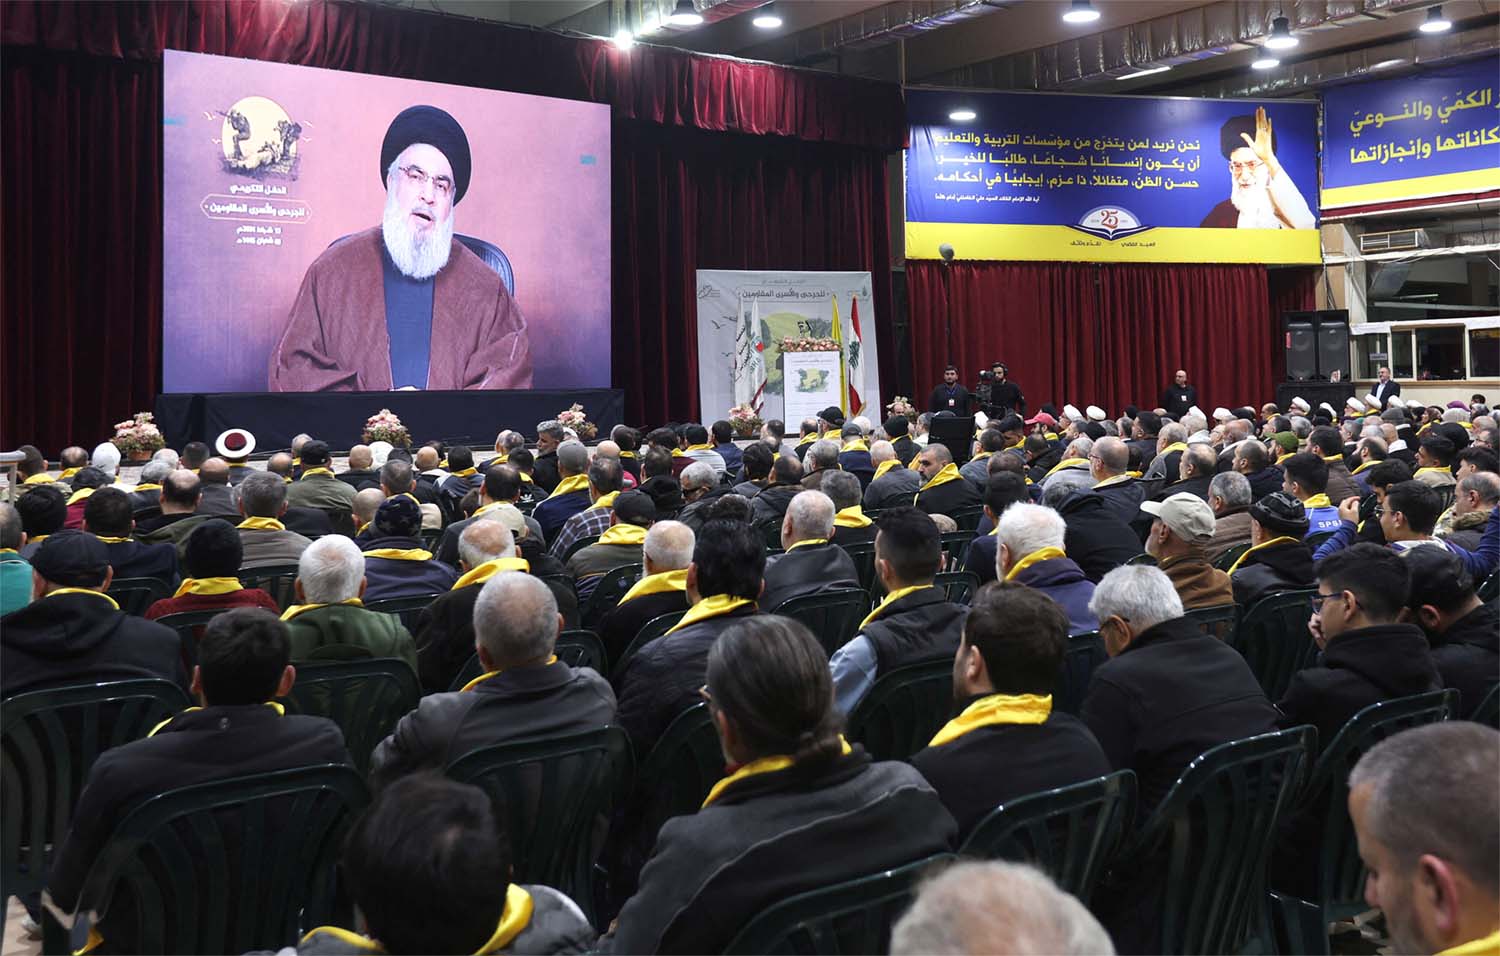 Nasrallah said that if Israel widened the war further in Lebanon, his group would do the same